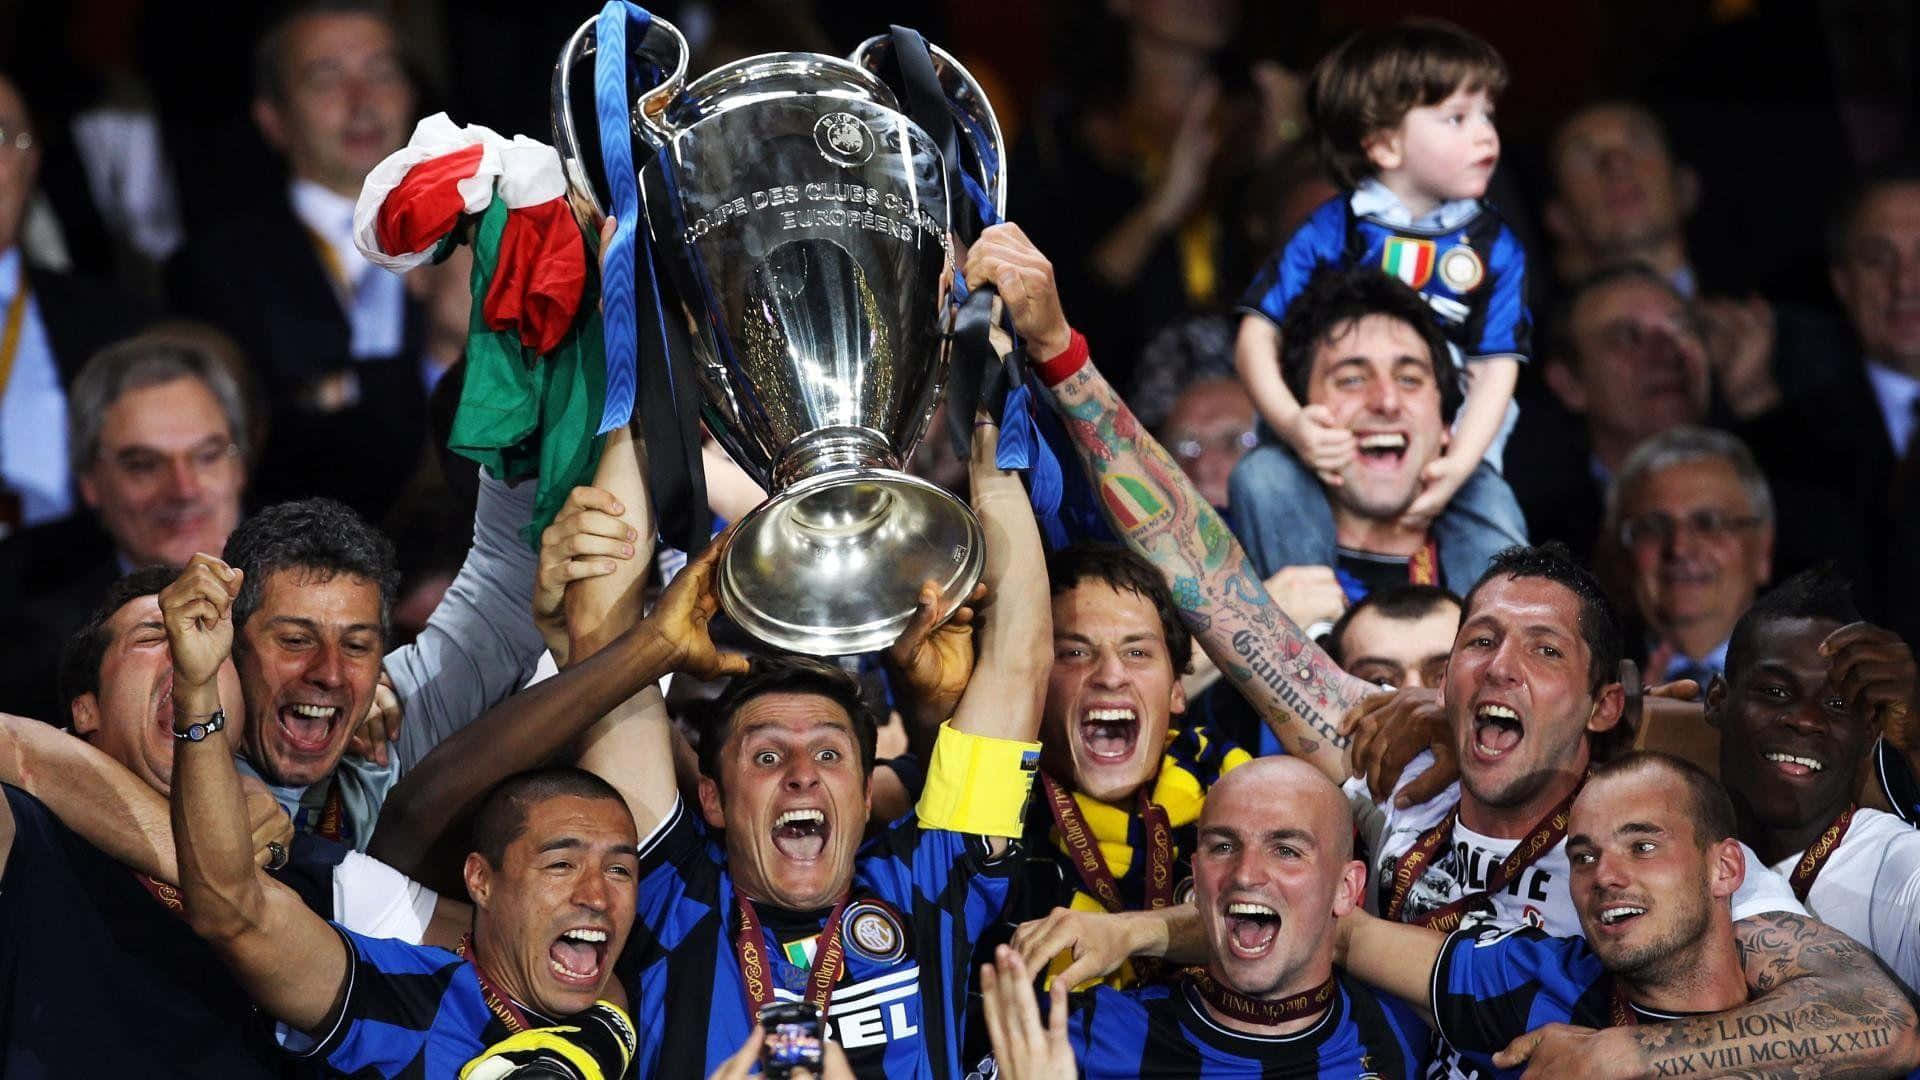 Inter Milan players celebrating a victory on the field Wallpaper